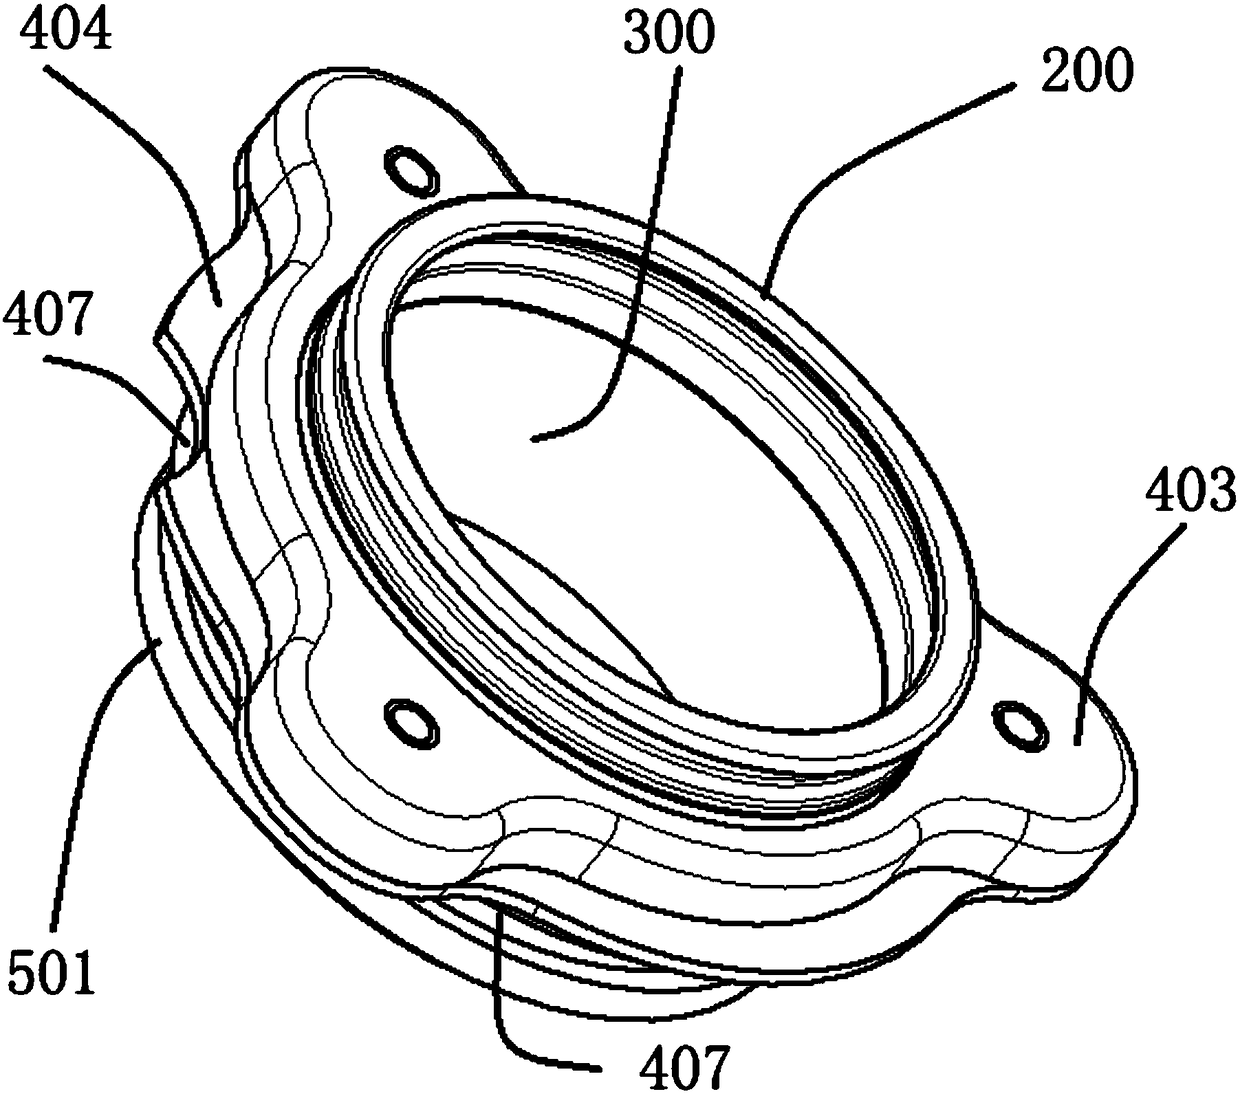 Steel collar assembly capable of being driven to rotate and supported by roller